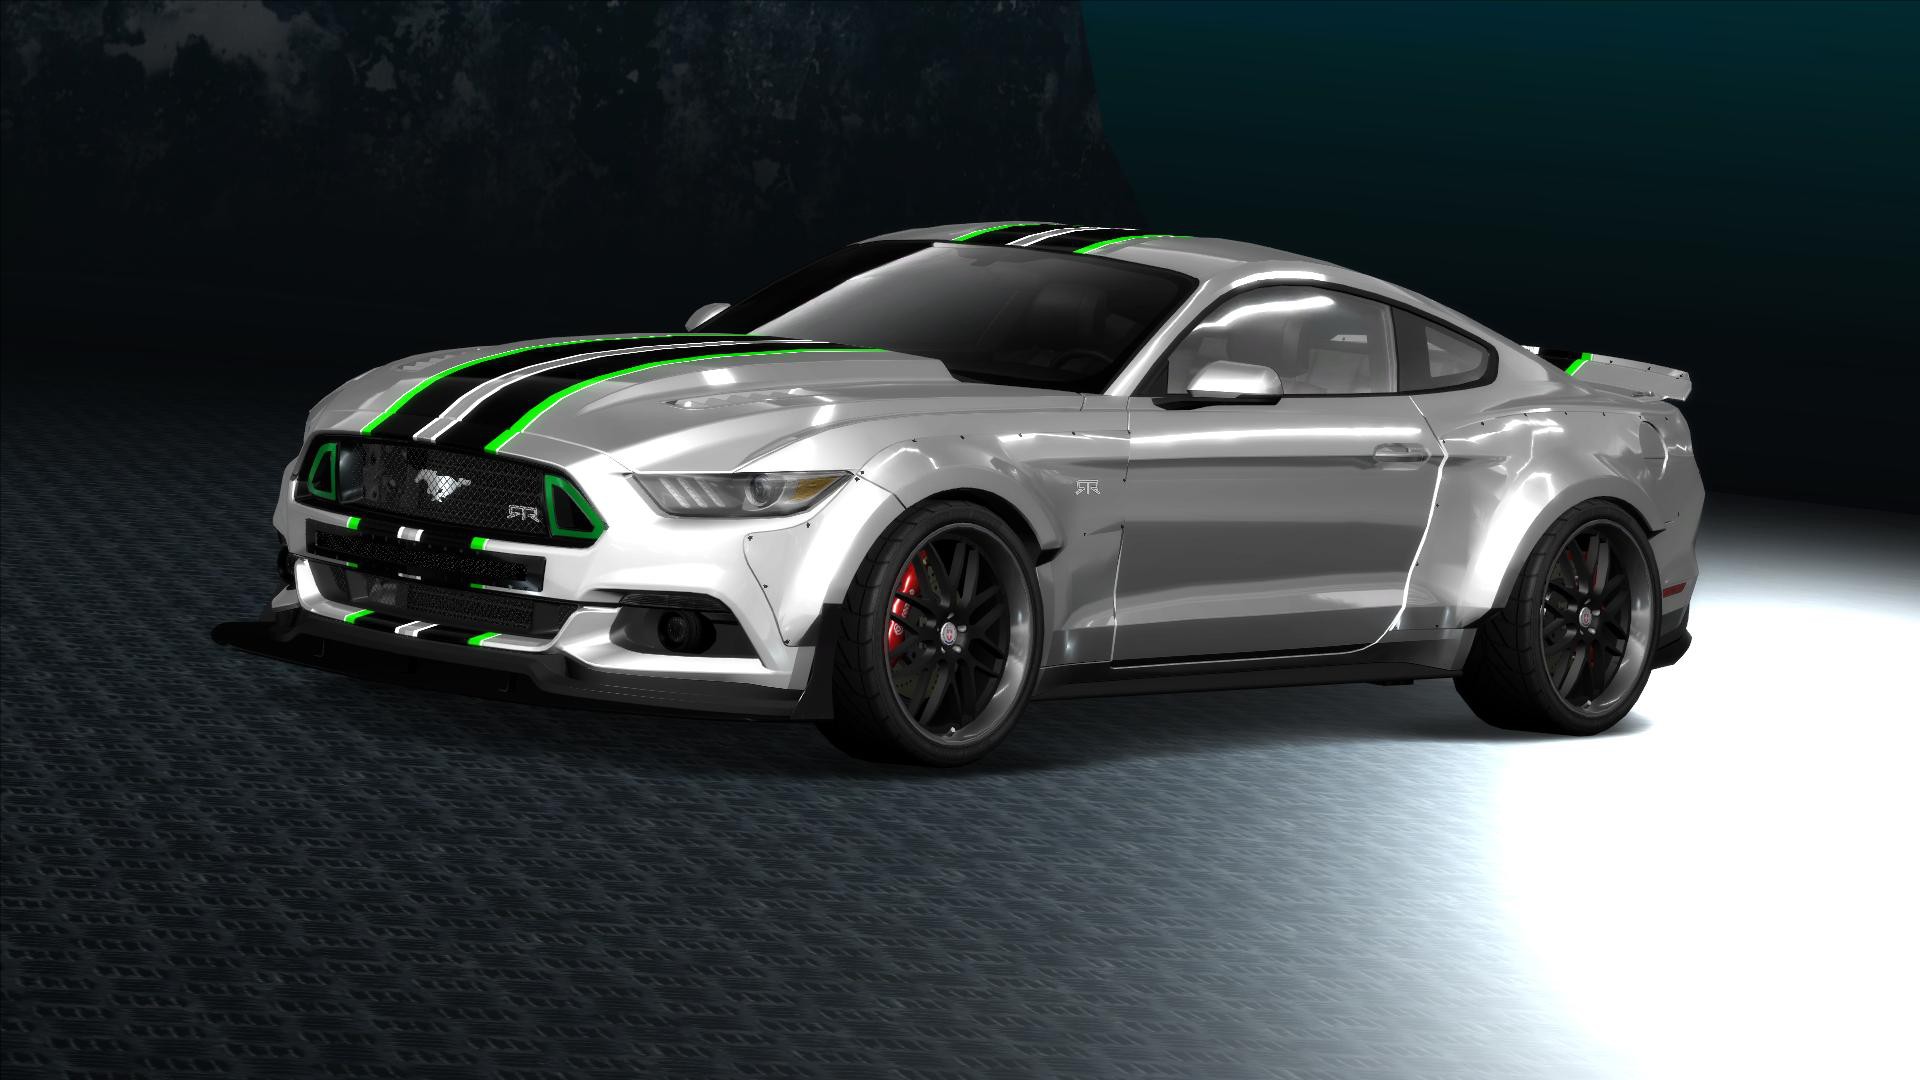 Мустанг payback. Ford Mustang gt 5.0. Ford Mustang RTR spec 3. Мустанг из NFS Payback. Ford Mustang gt 500 RTR.